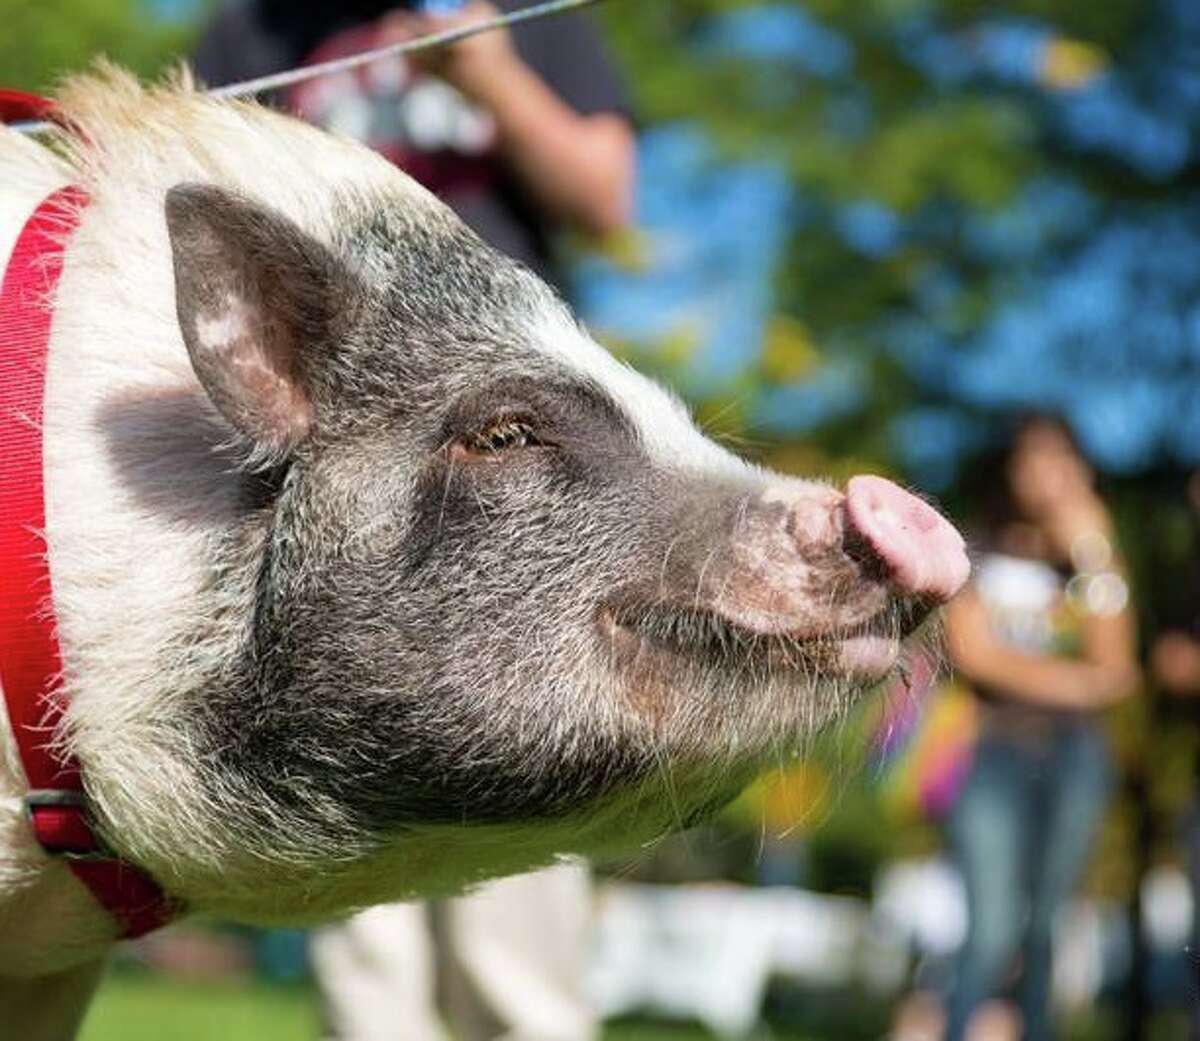 Hearst Connecticut HR business partner, Kate Evans' Potbelly Pig named Penny is 3.5 years old and 90 lbs of mischief. Pigs are the 4th smartest animal and she has the cognitive ability of a 3 year old human.